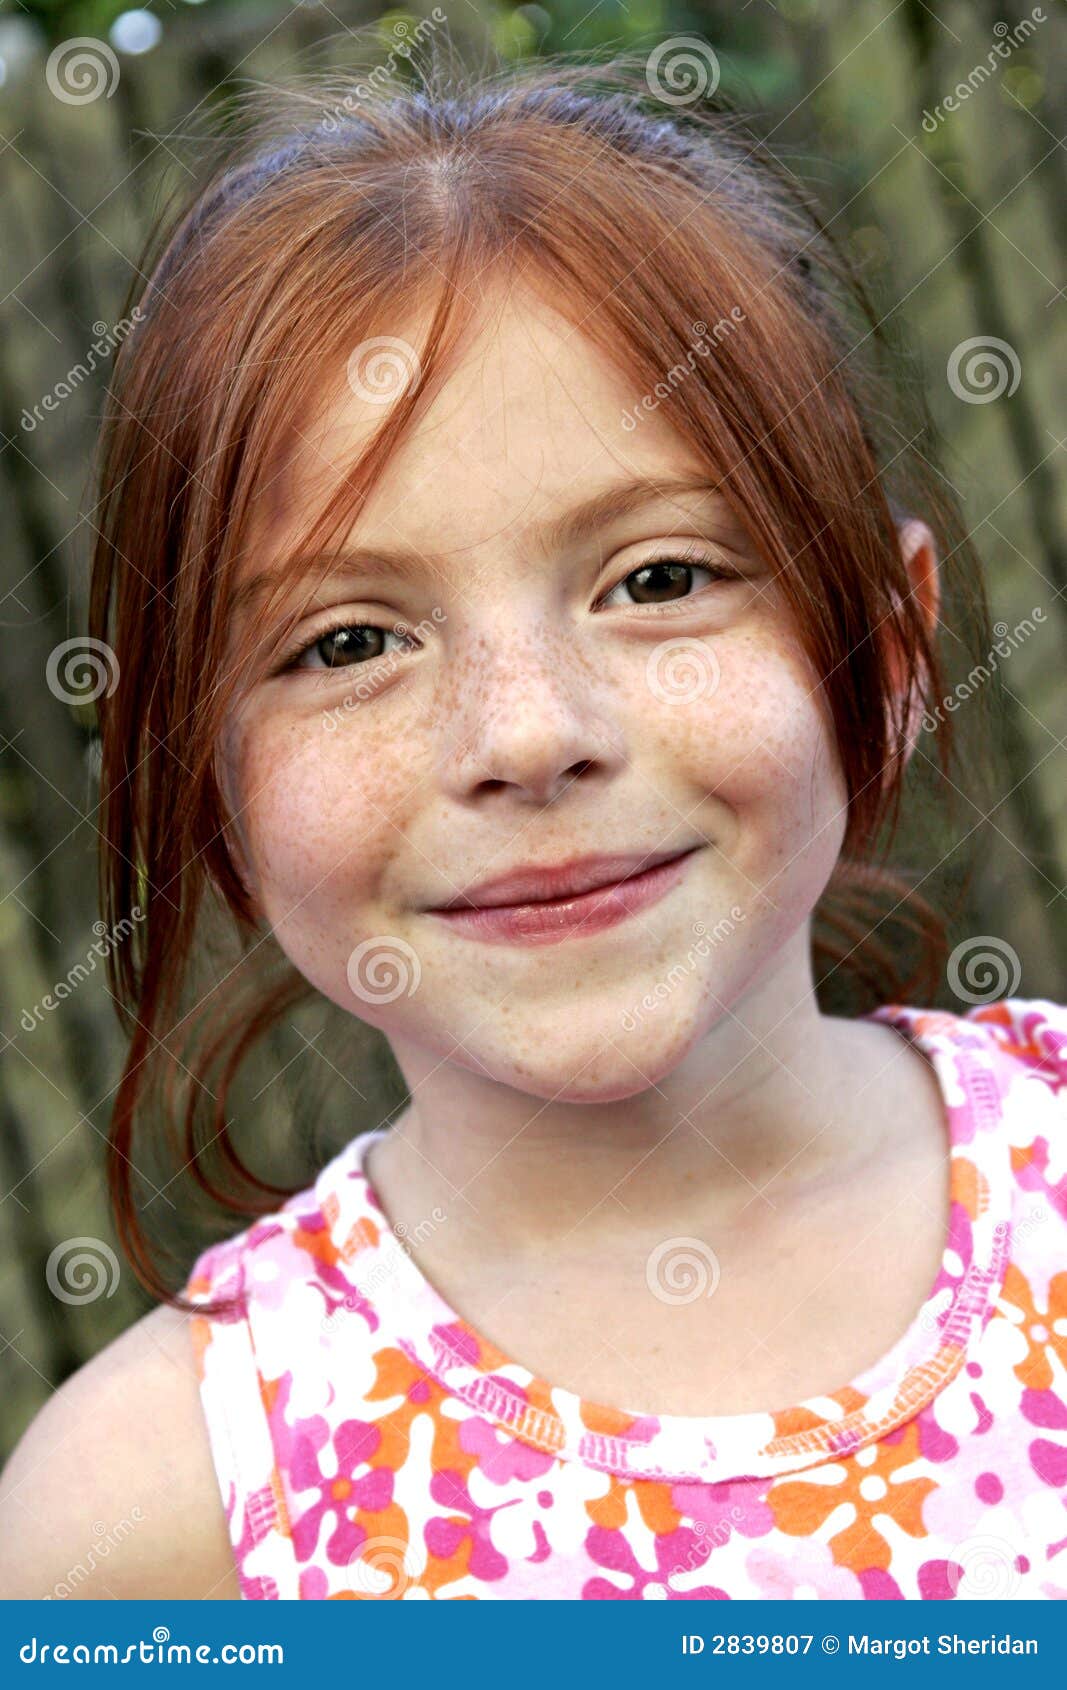 red hair and freckles